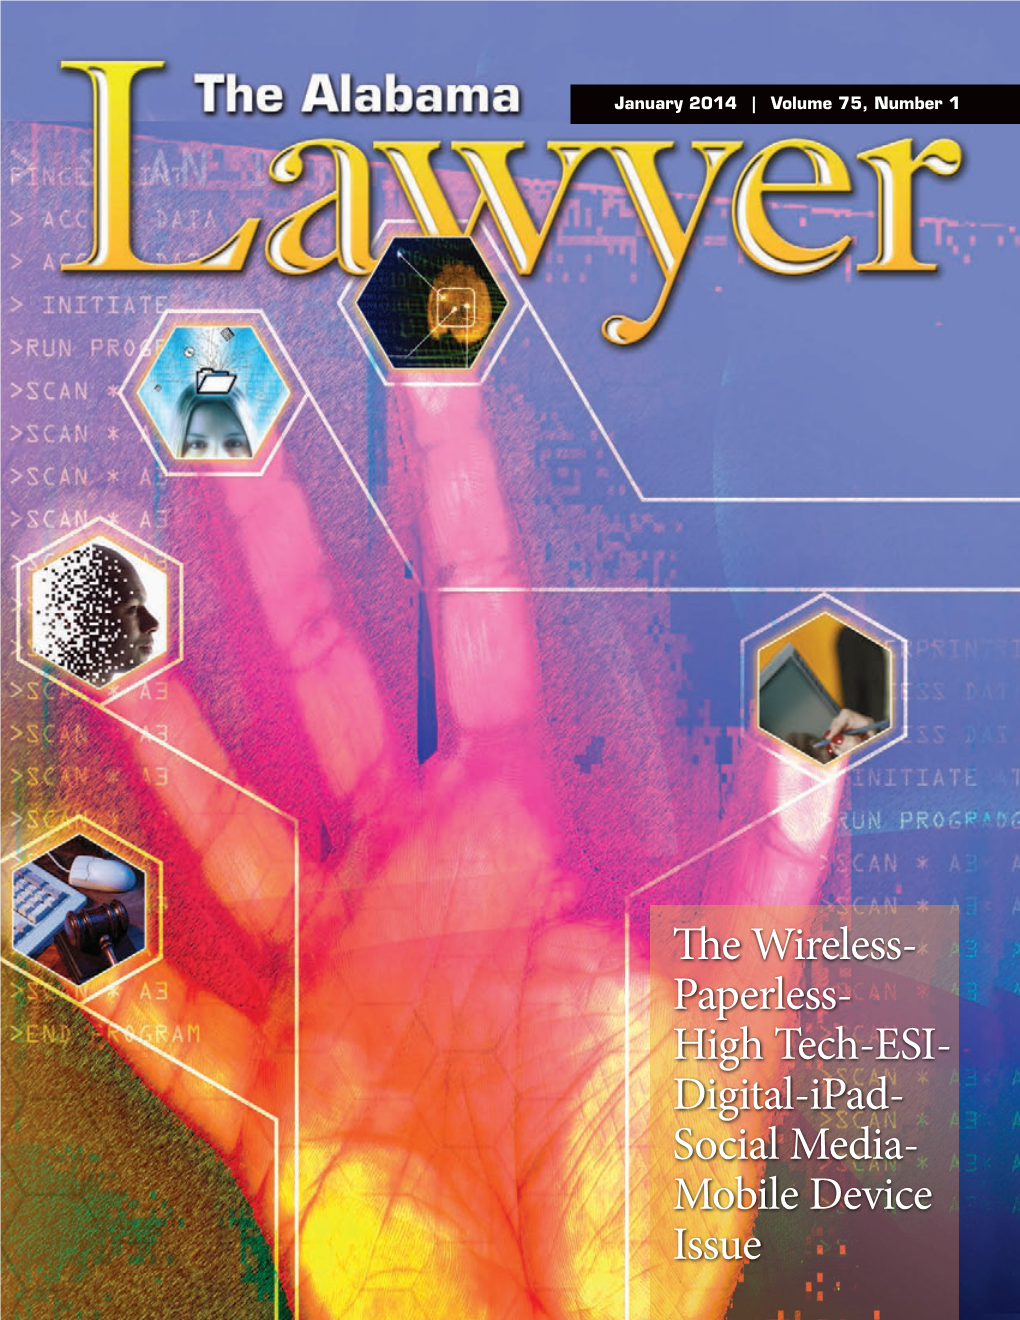 E Wireless- Paperless- High Tech-ESI- Digital-Ipad- Social Media- Mobile Device Issue 65923-1 Alabar.Qxd Lawyer 1/2/14 6:11 PM Page 2